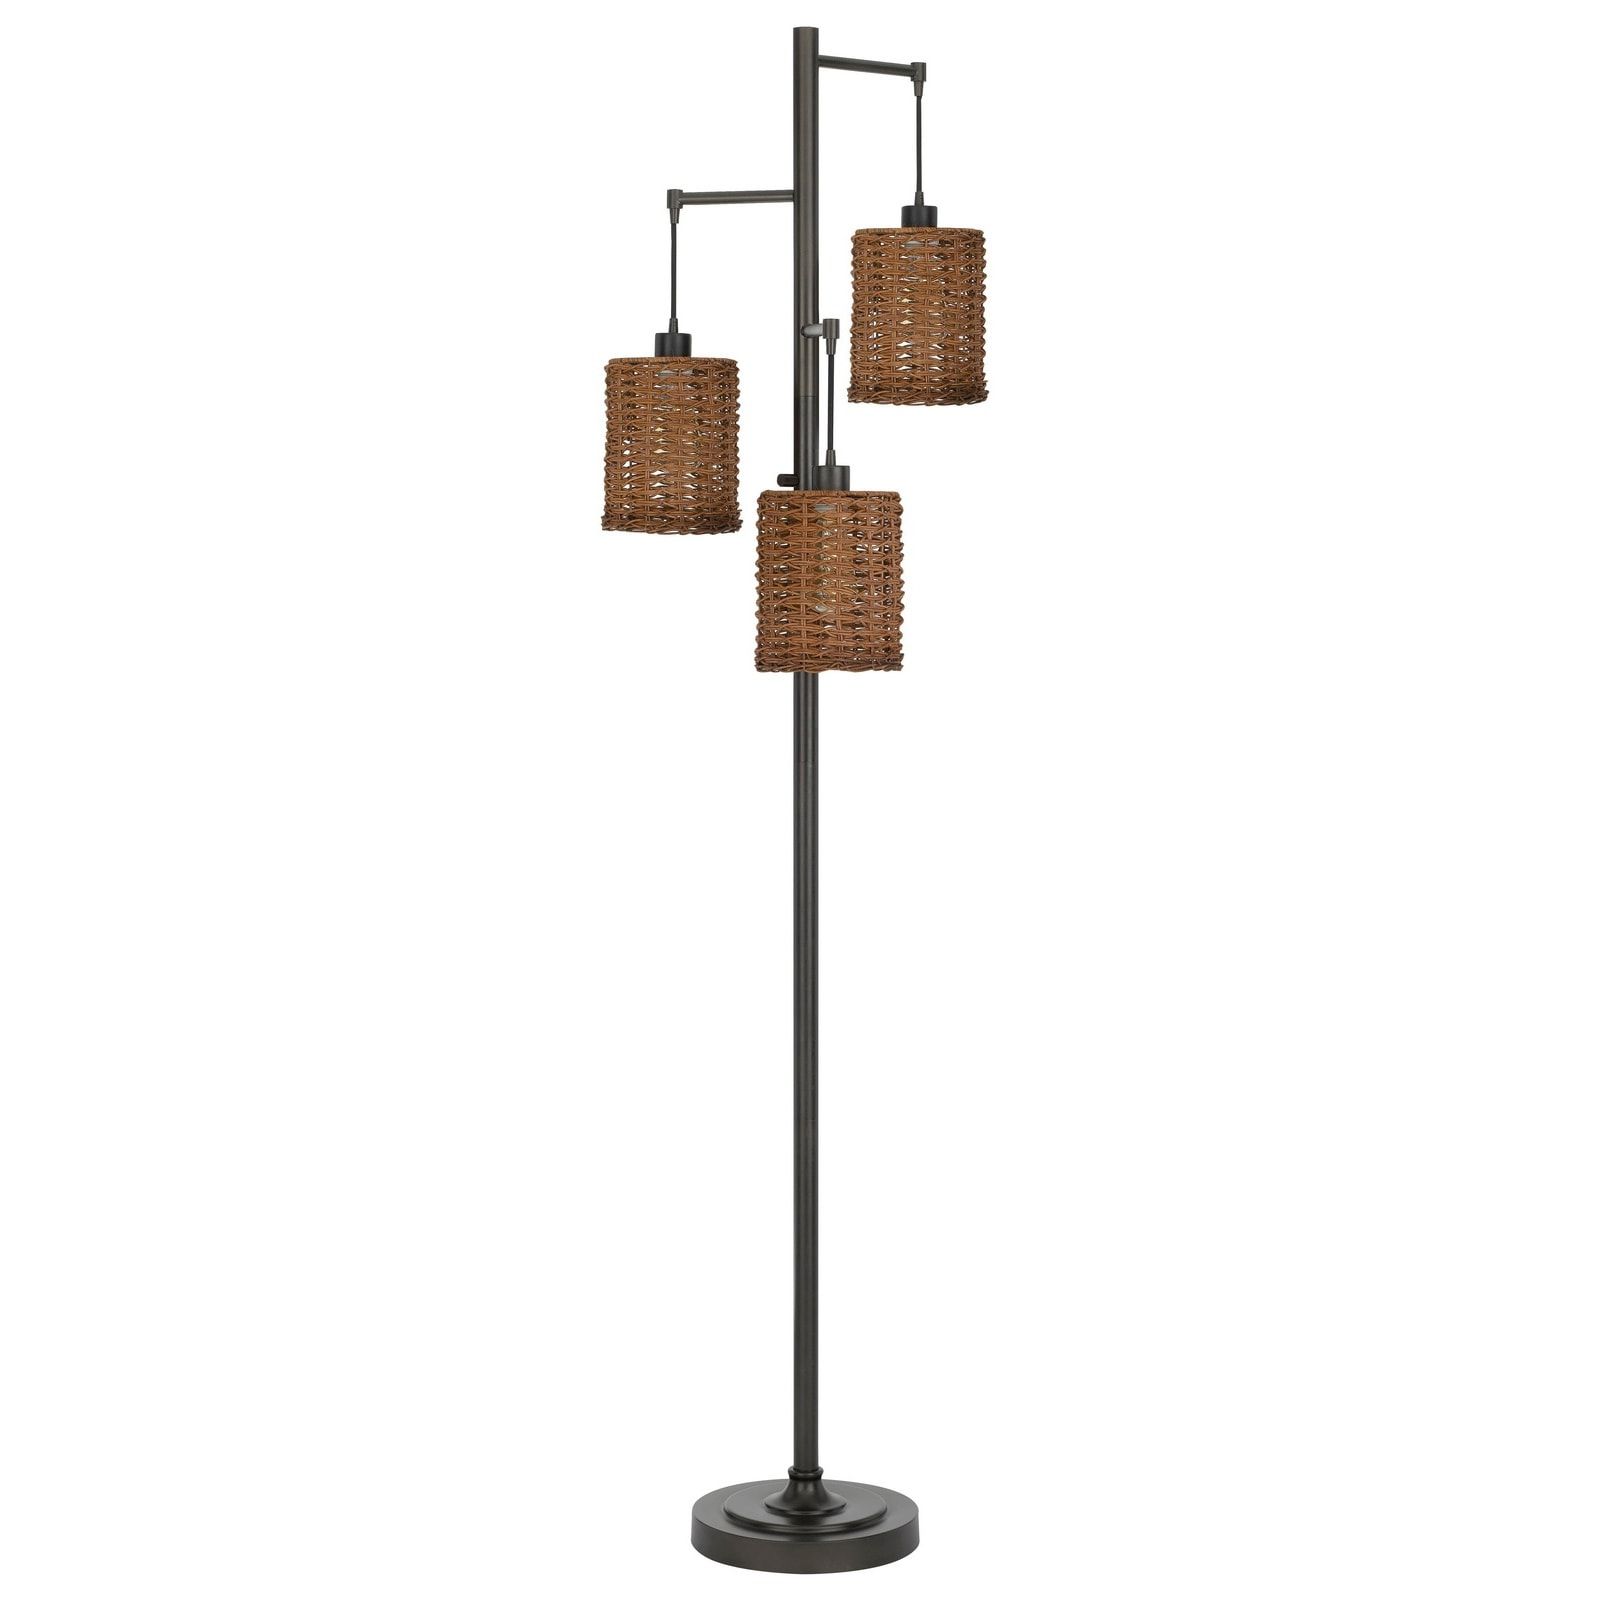 Widely Used Connell Dark Bronze Metal Floor Lamp With Rattan Shades – On Sale –  Overstock – 32632555 For Dark Bronze Standing Lamps (View 5 of 10)